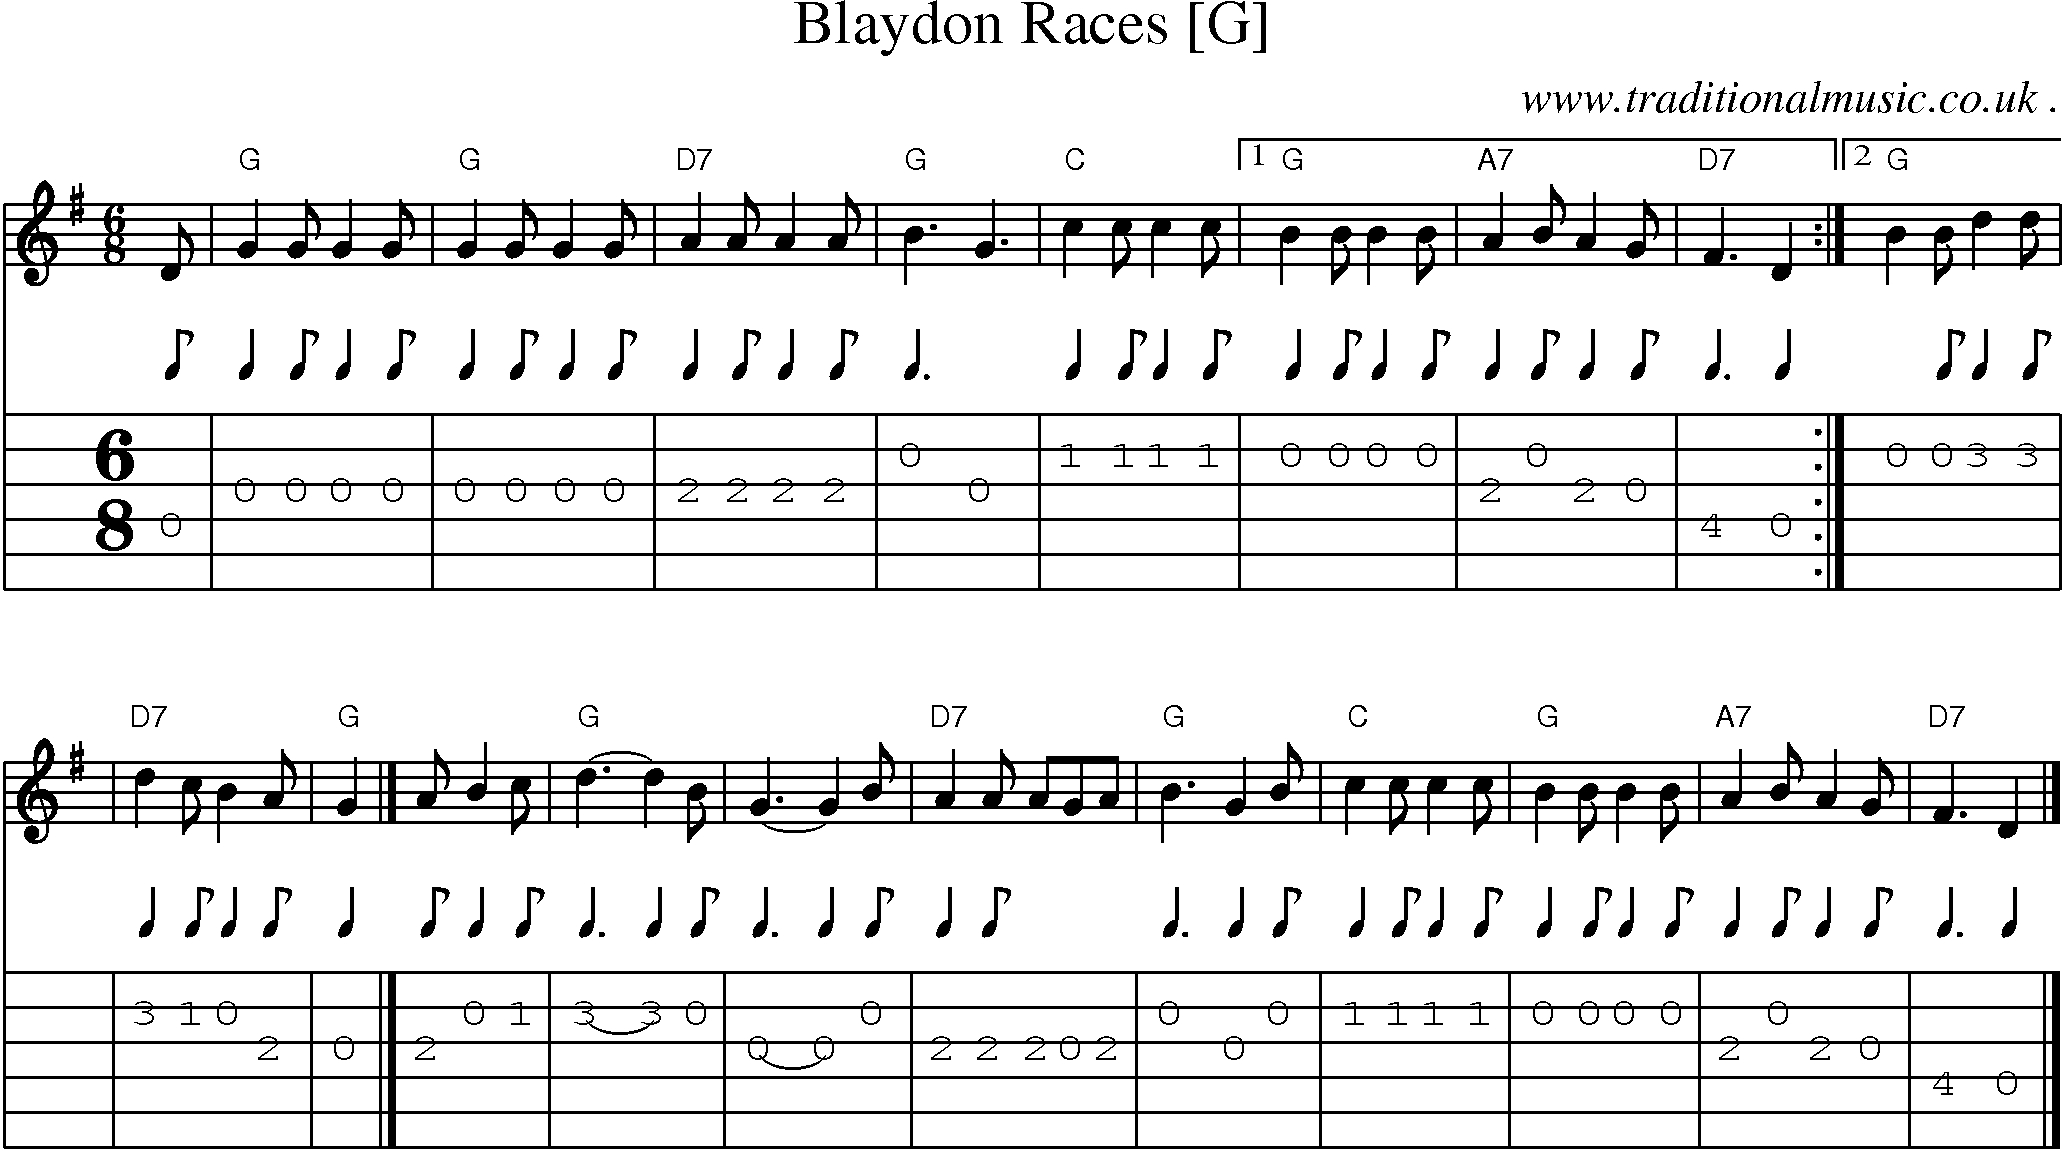 Sheet-music  score, Chords and Guitar Tabs for Blaydon Races [g]